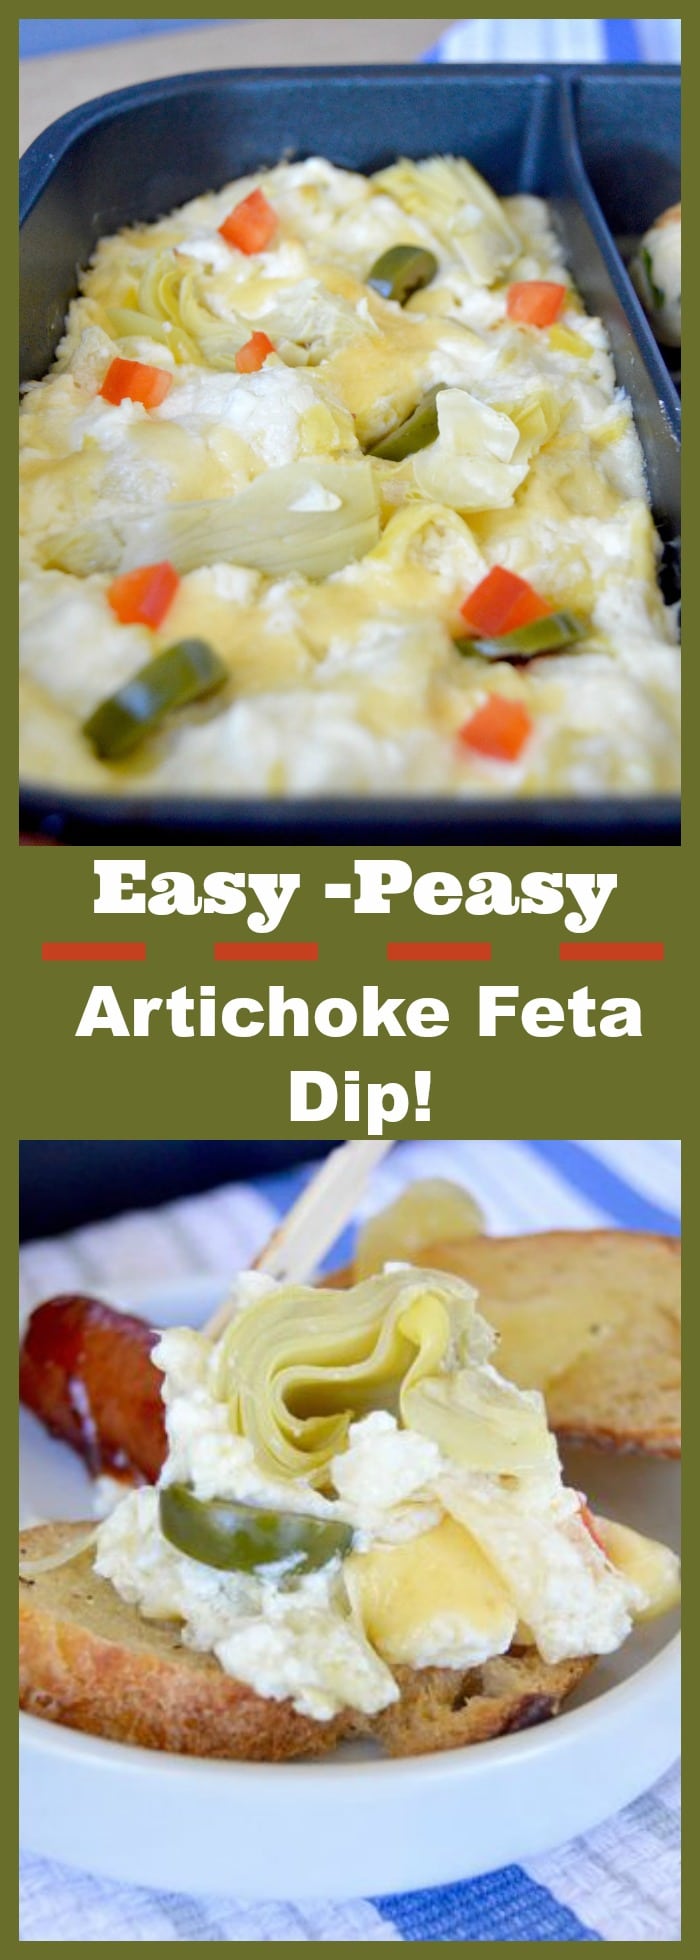 Artichoke Feta Dip: Creamy, tangy, super spreadable and perfect to mix up quickly! A perfect dip for any occasion.